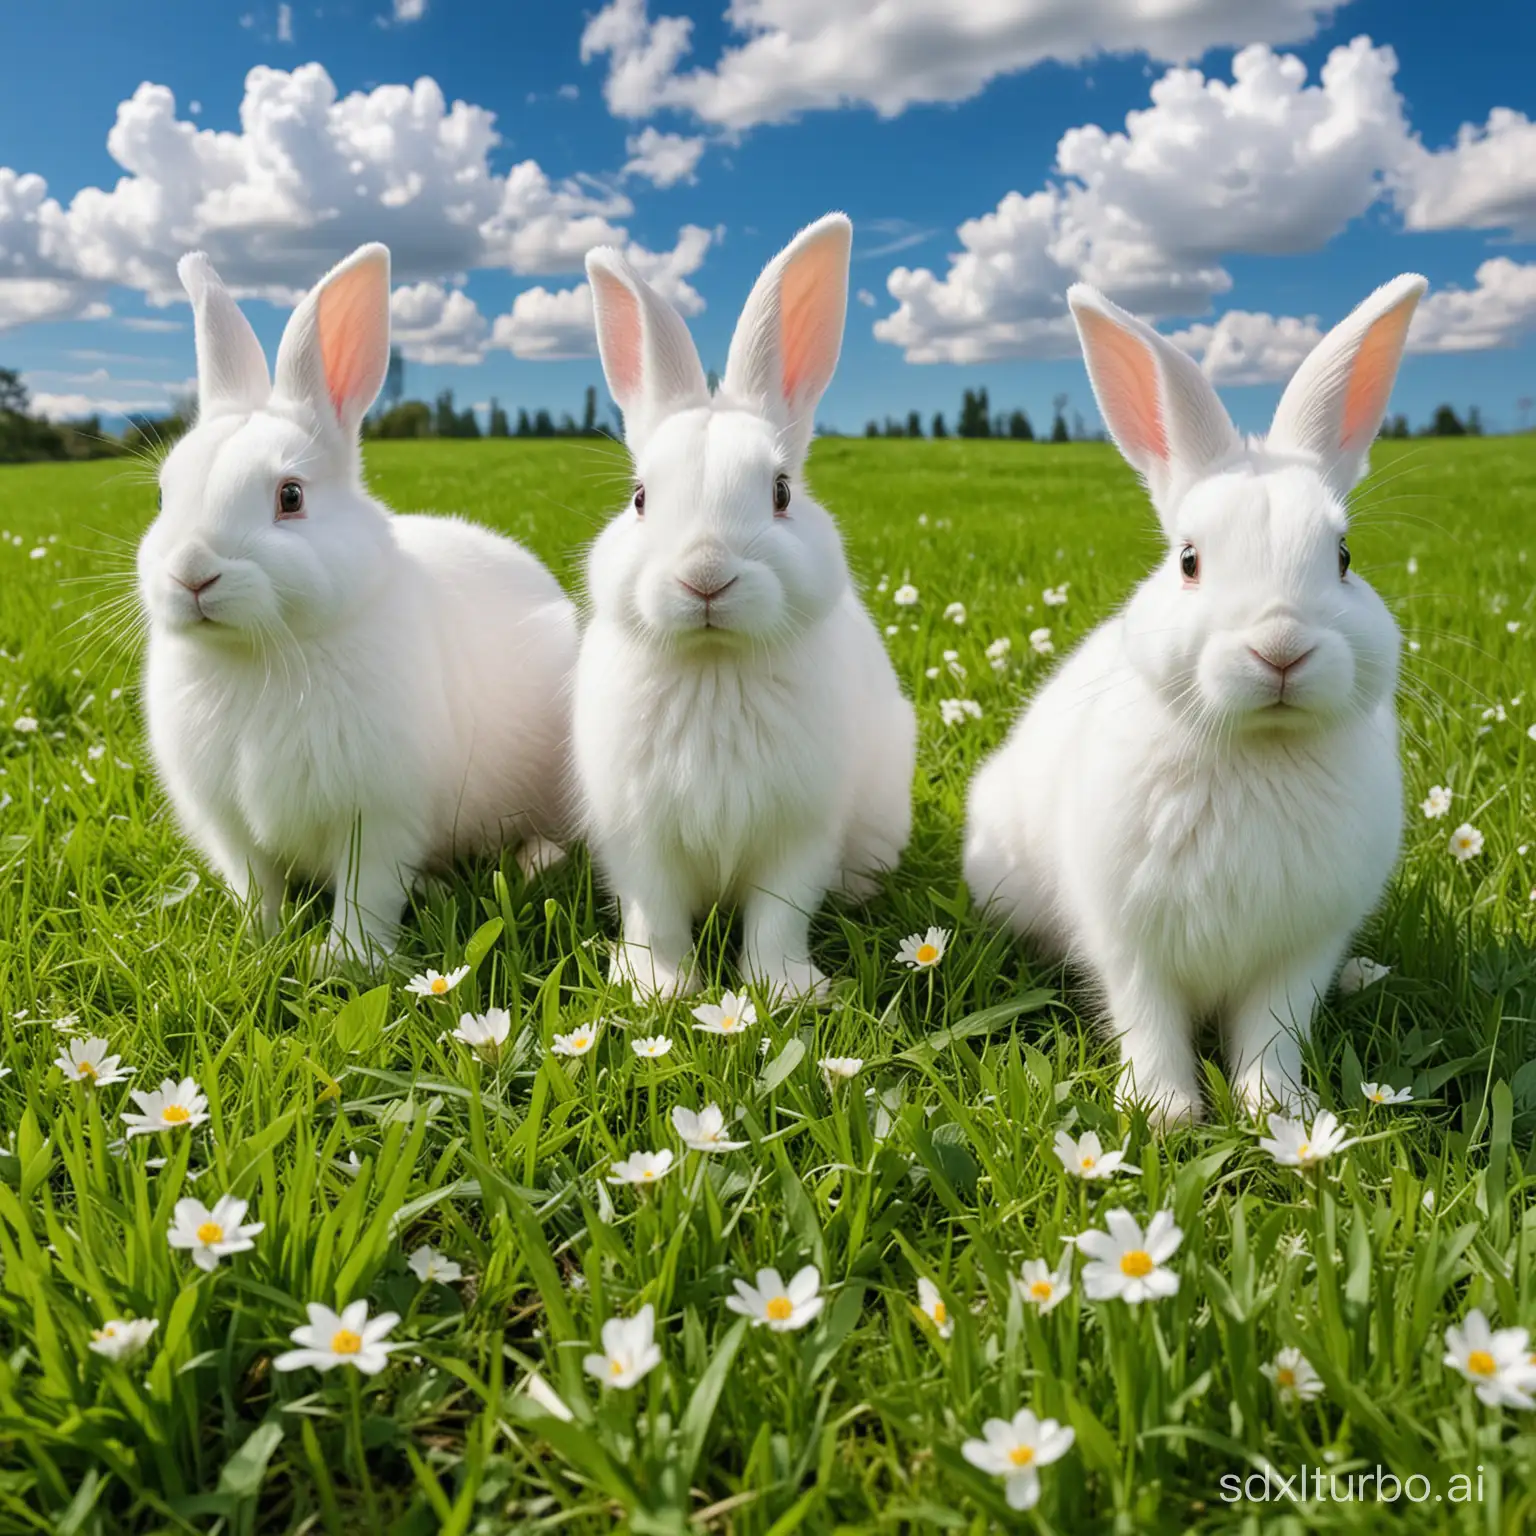 4 white color rabbits on green grass, flowers, green grass, blue sky, white clouds